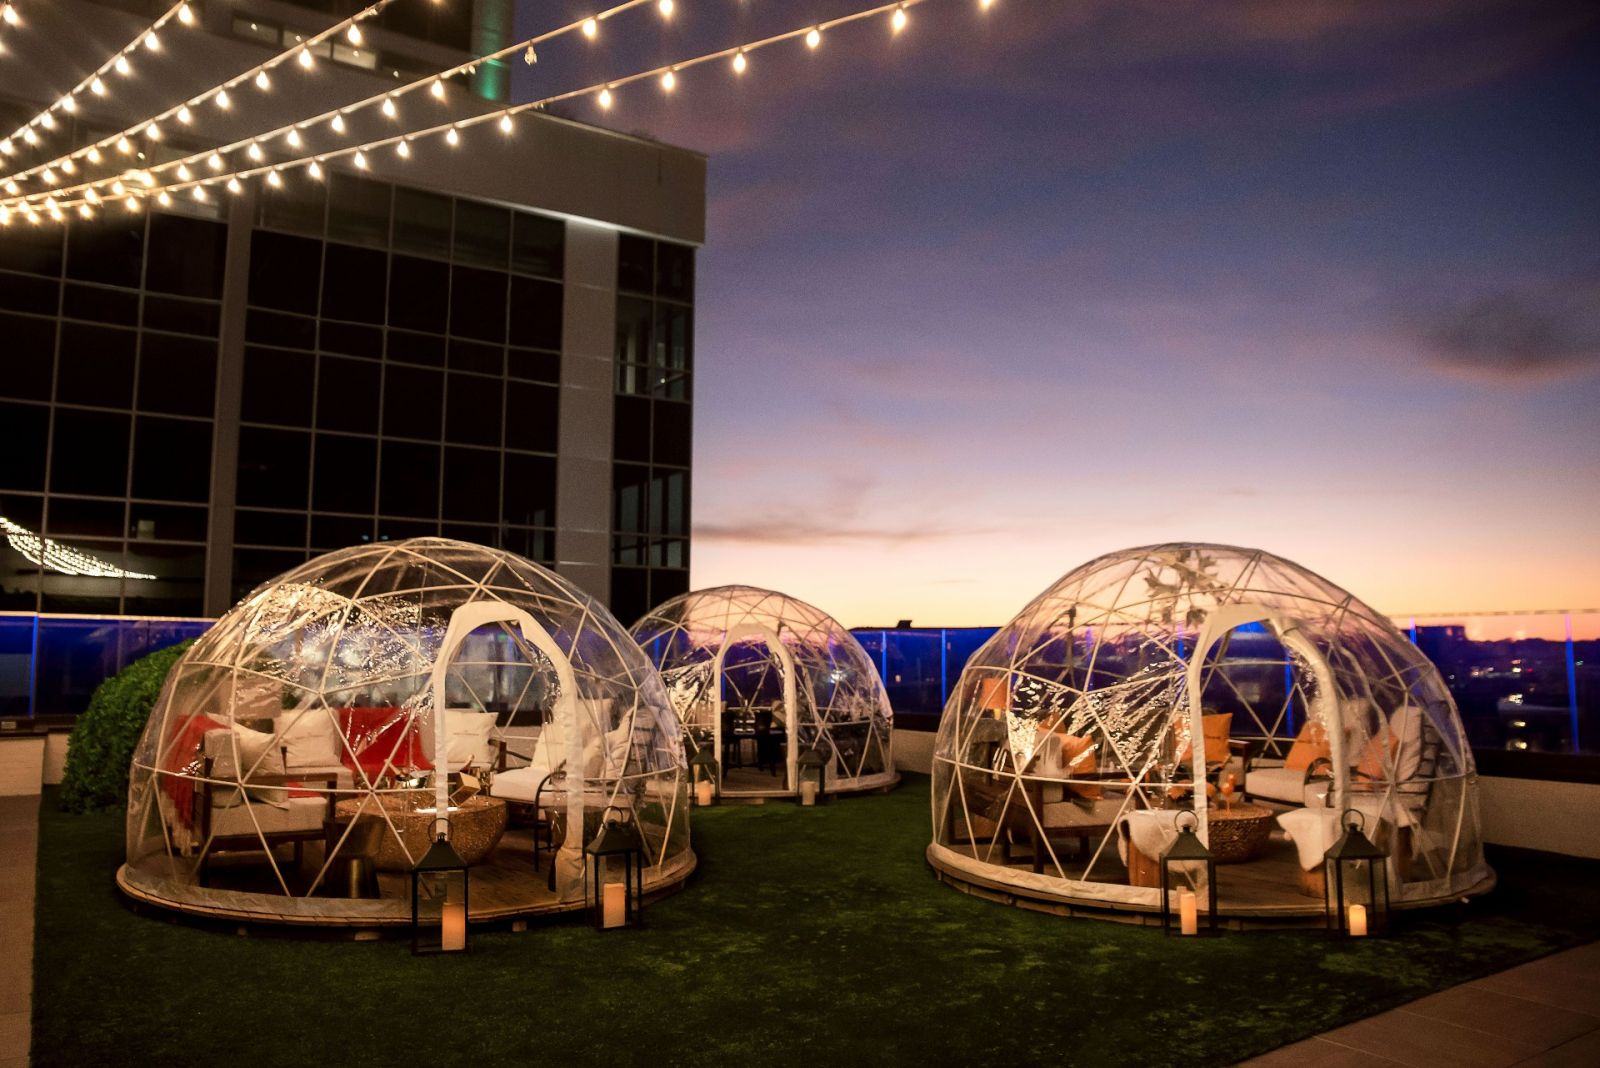 Each of the igloos can hold up to eight people and offers one of three champagne brands. (Photo/Provided)